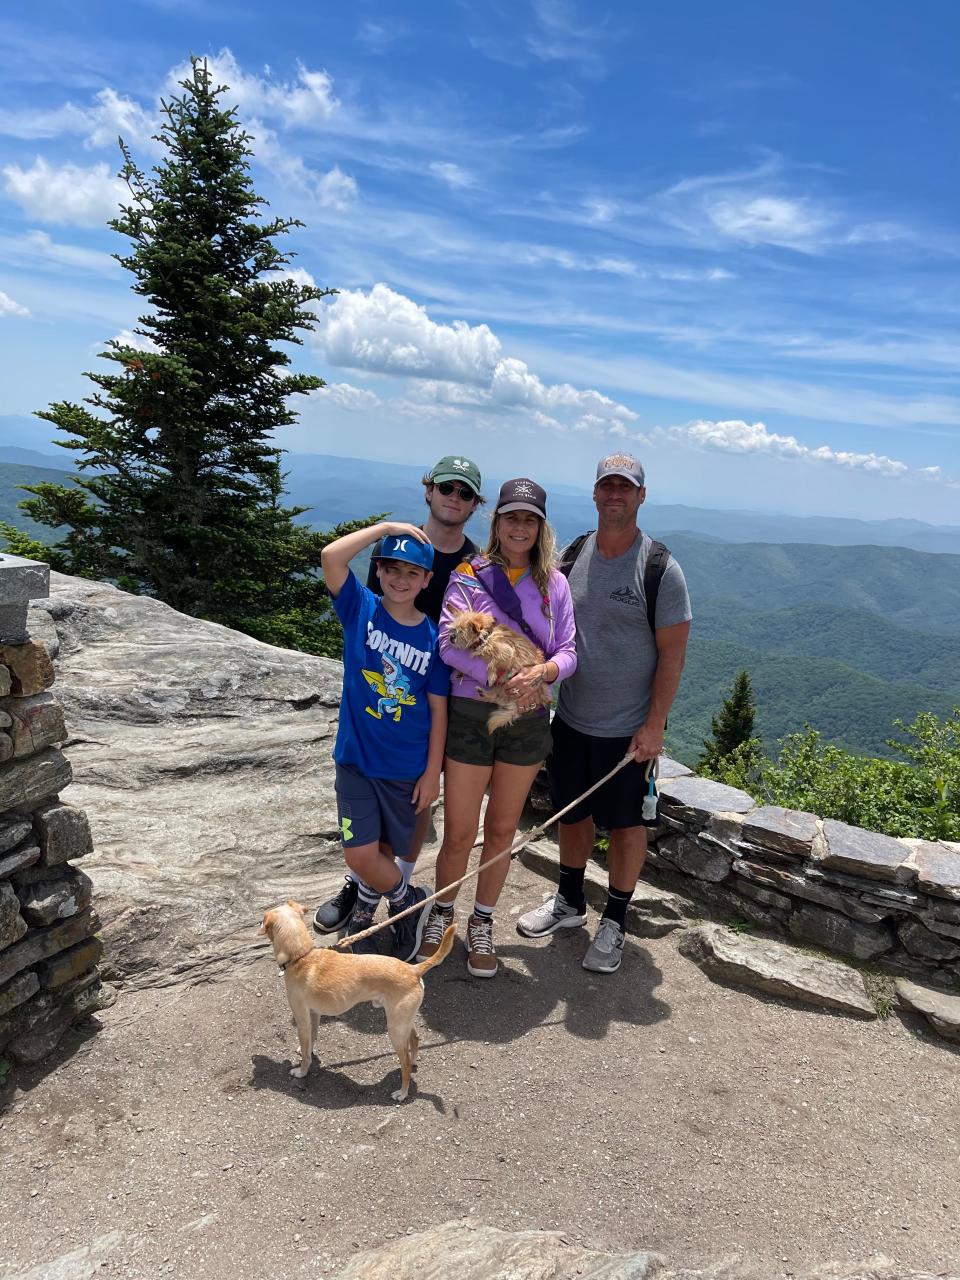 The Skudin family at the Devil's Courthouse on the Blue Ridge Parkway on June 17, 2022.